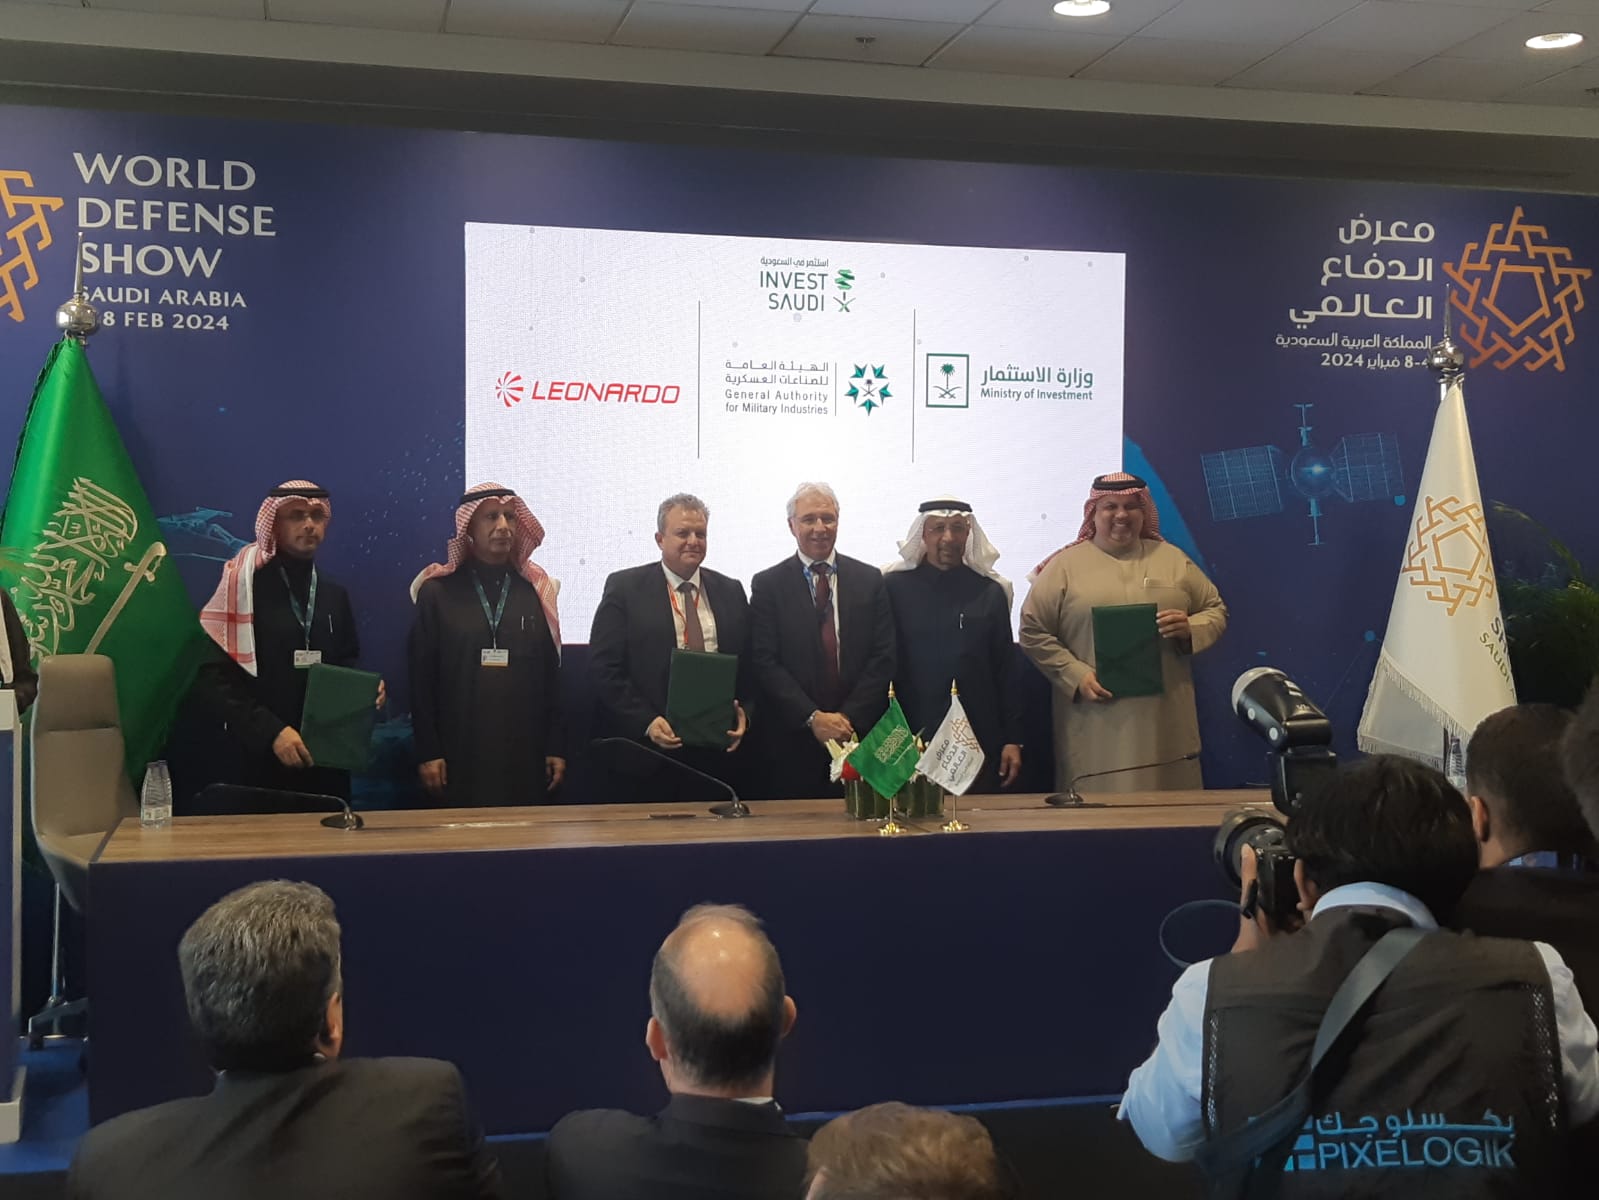 LEONARDO SIGNS MOU WITH THE KINGDOM OF SAUDI ARABIA FOR AEROSPACE AND DEFENCE COLLABORATION OPPORTUNITIES